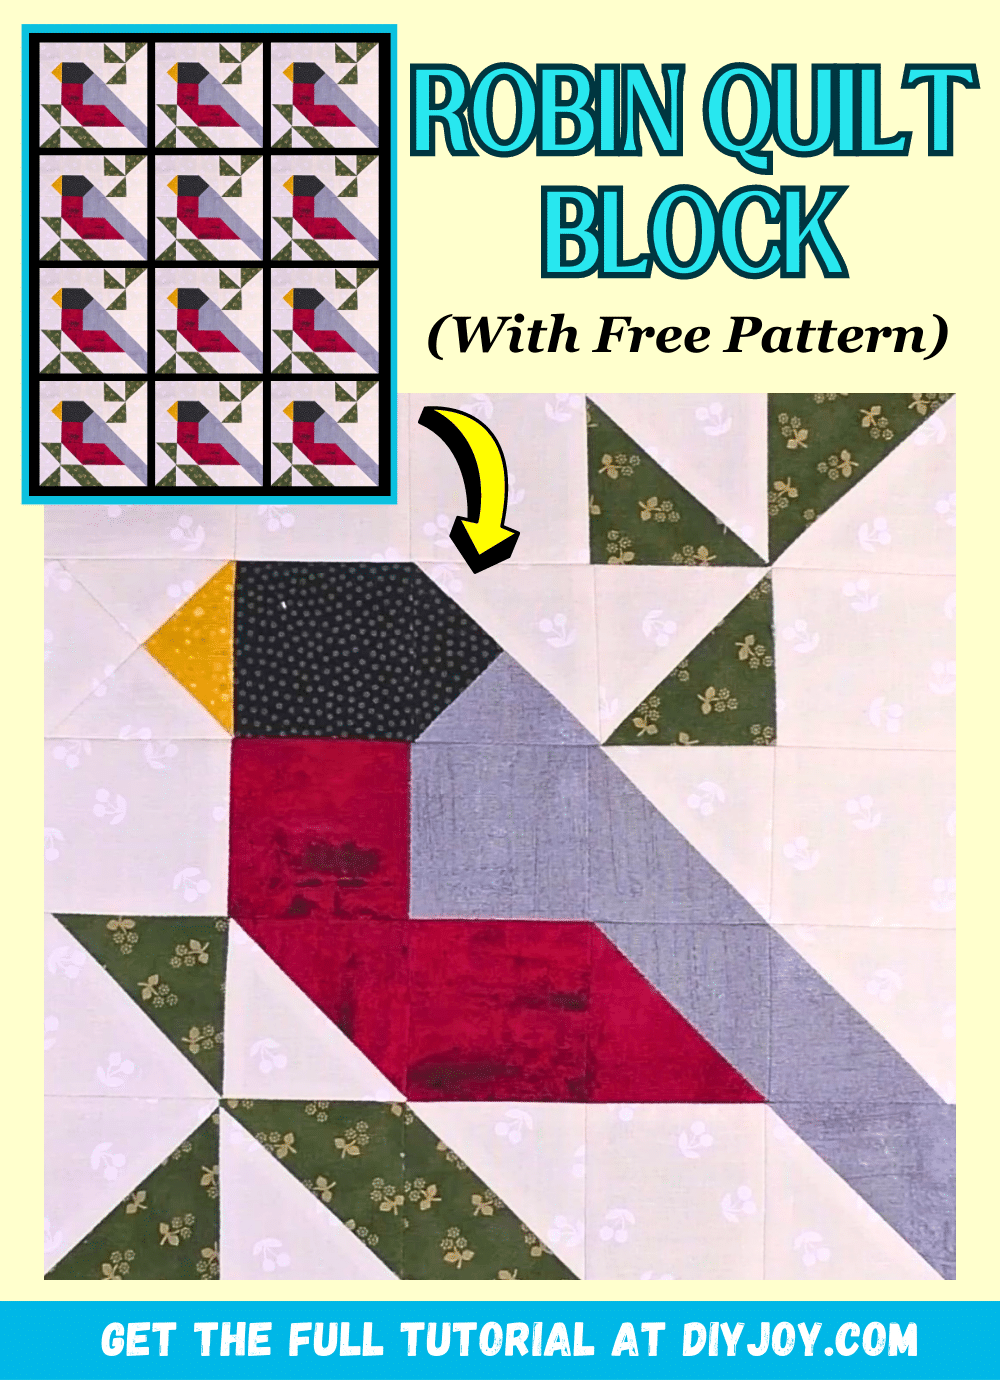 Easy-to-Make Robin Quilt Block (with Free Pattern)